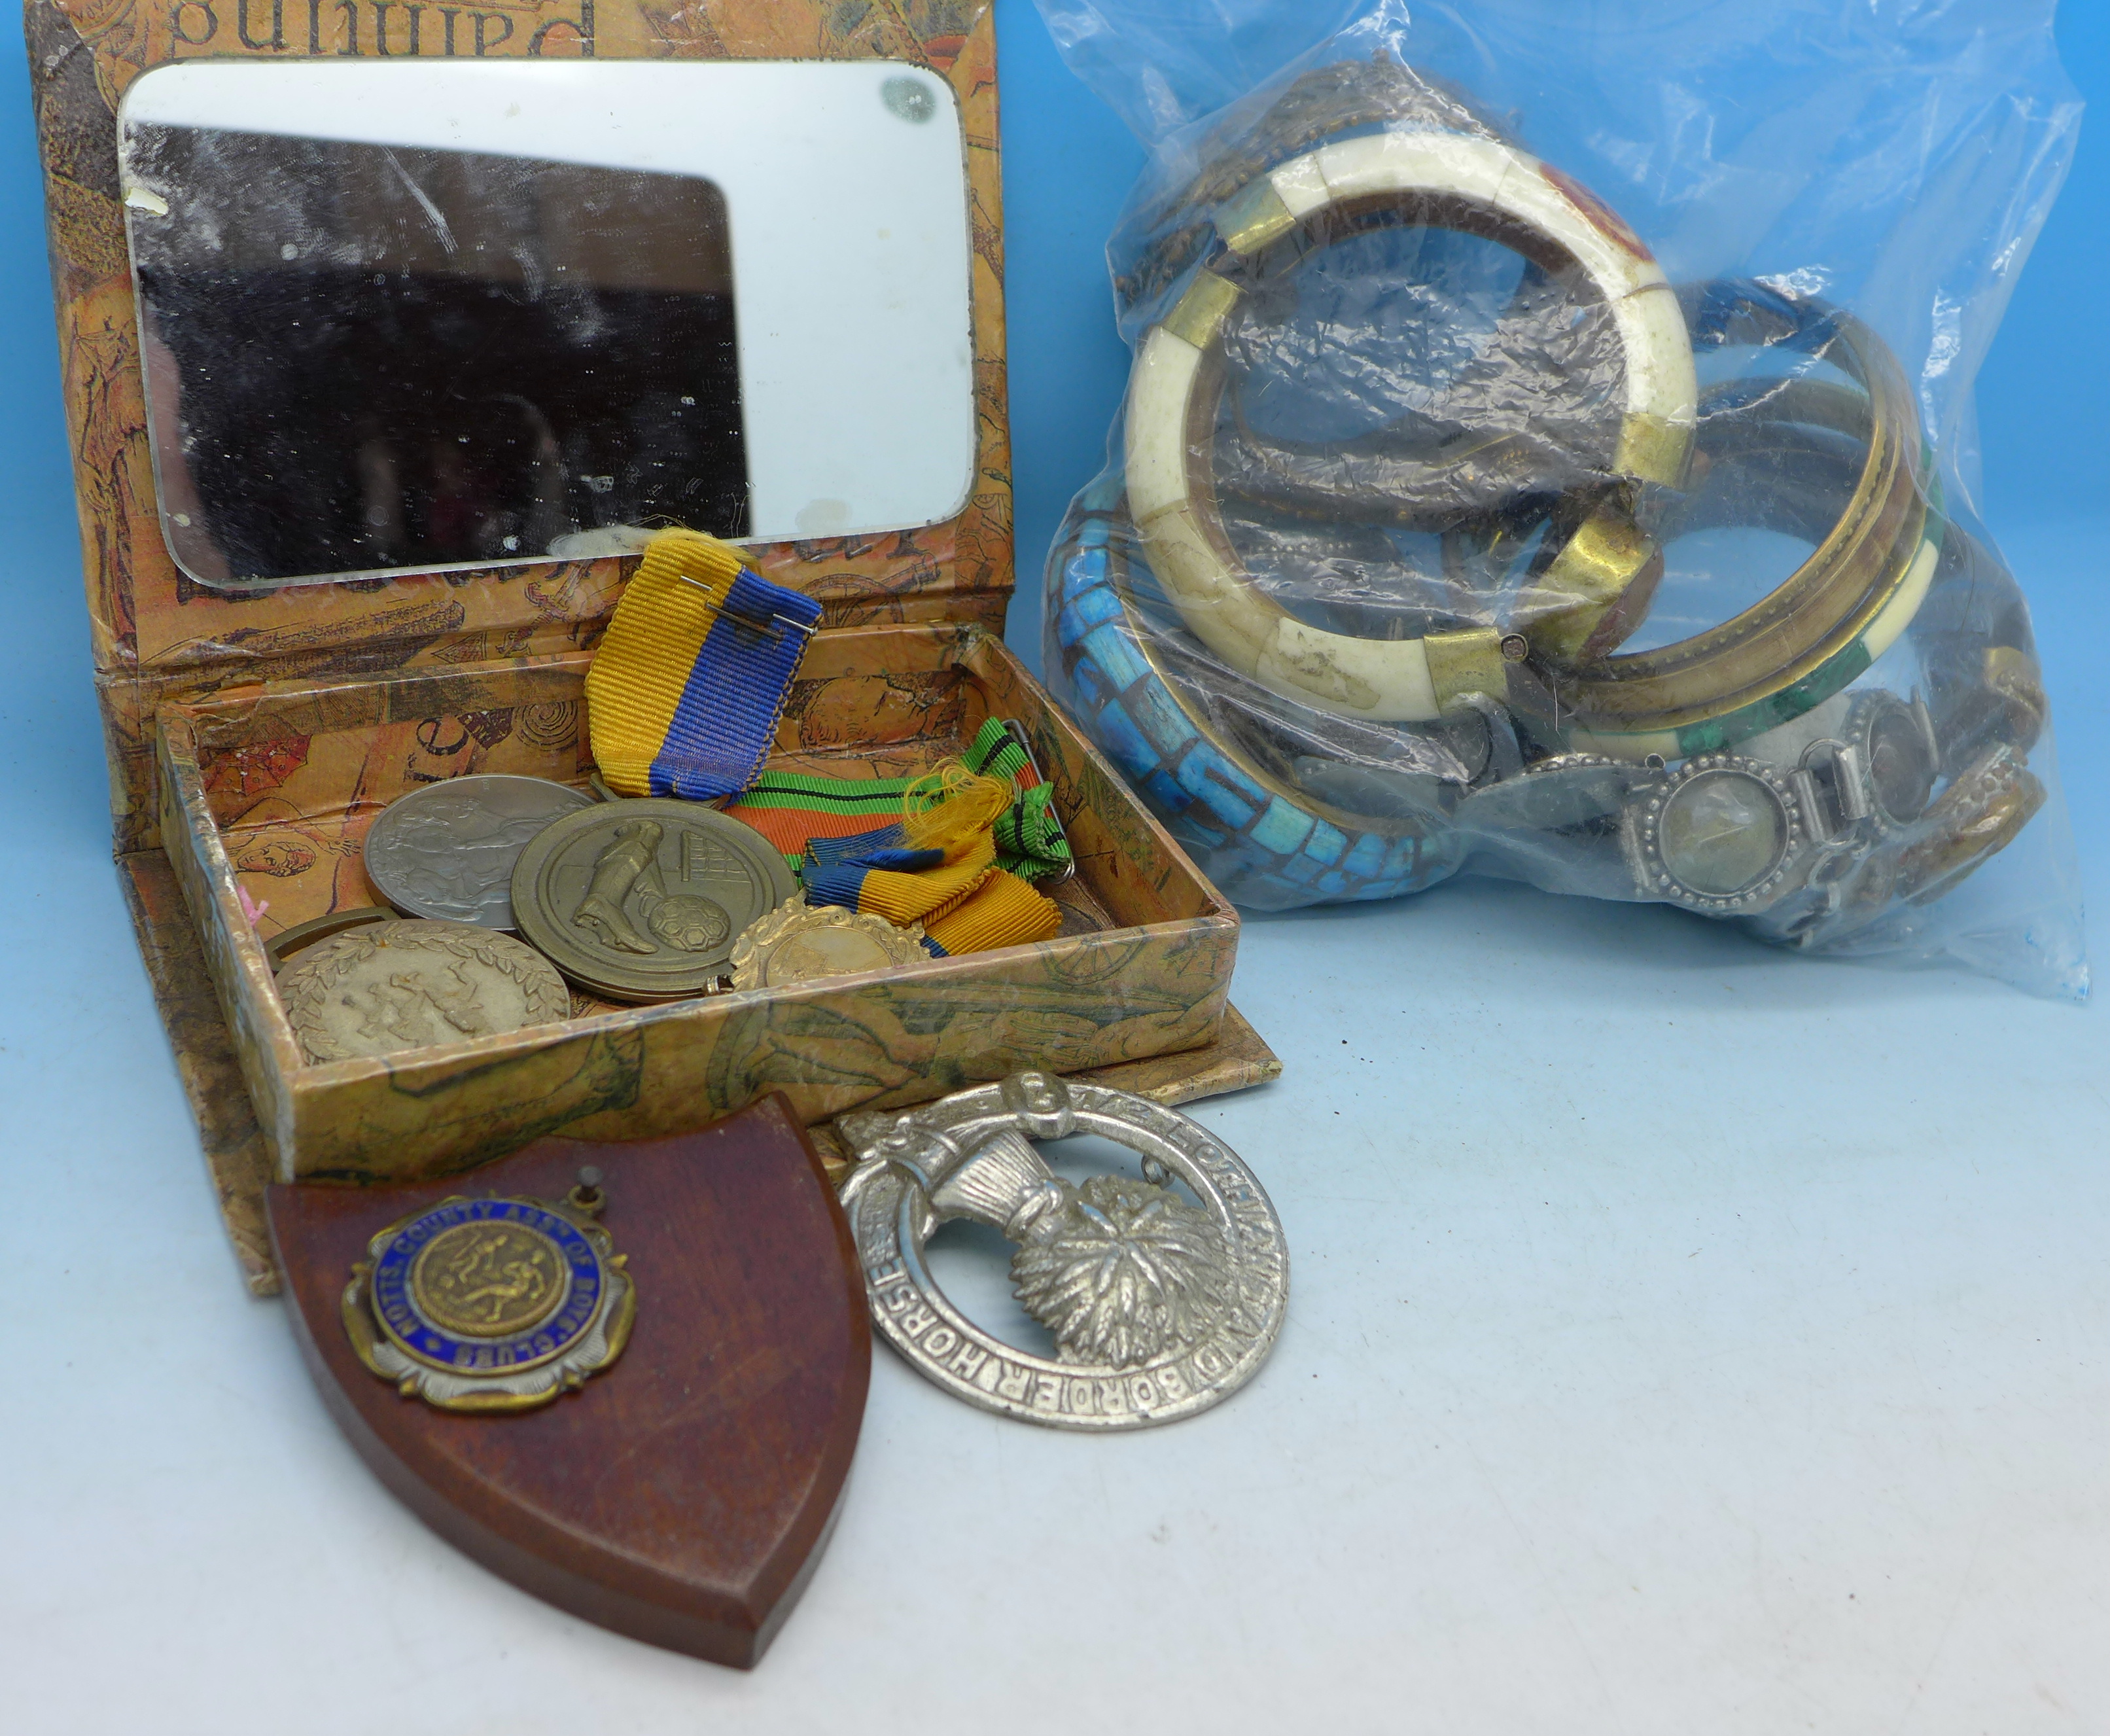 A WWII medal, other medallions, bangles, etc.